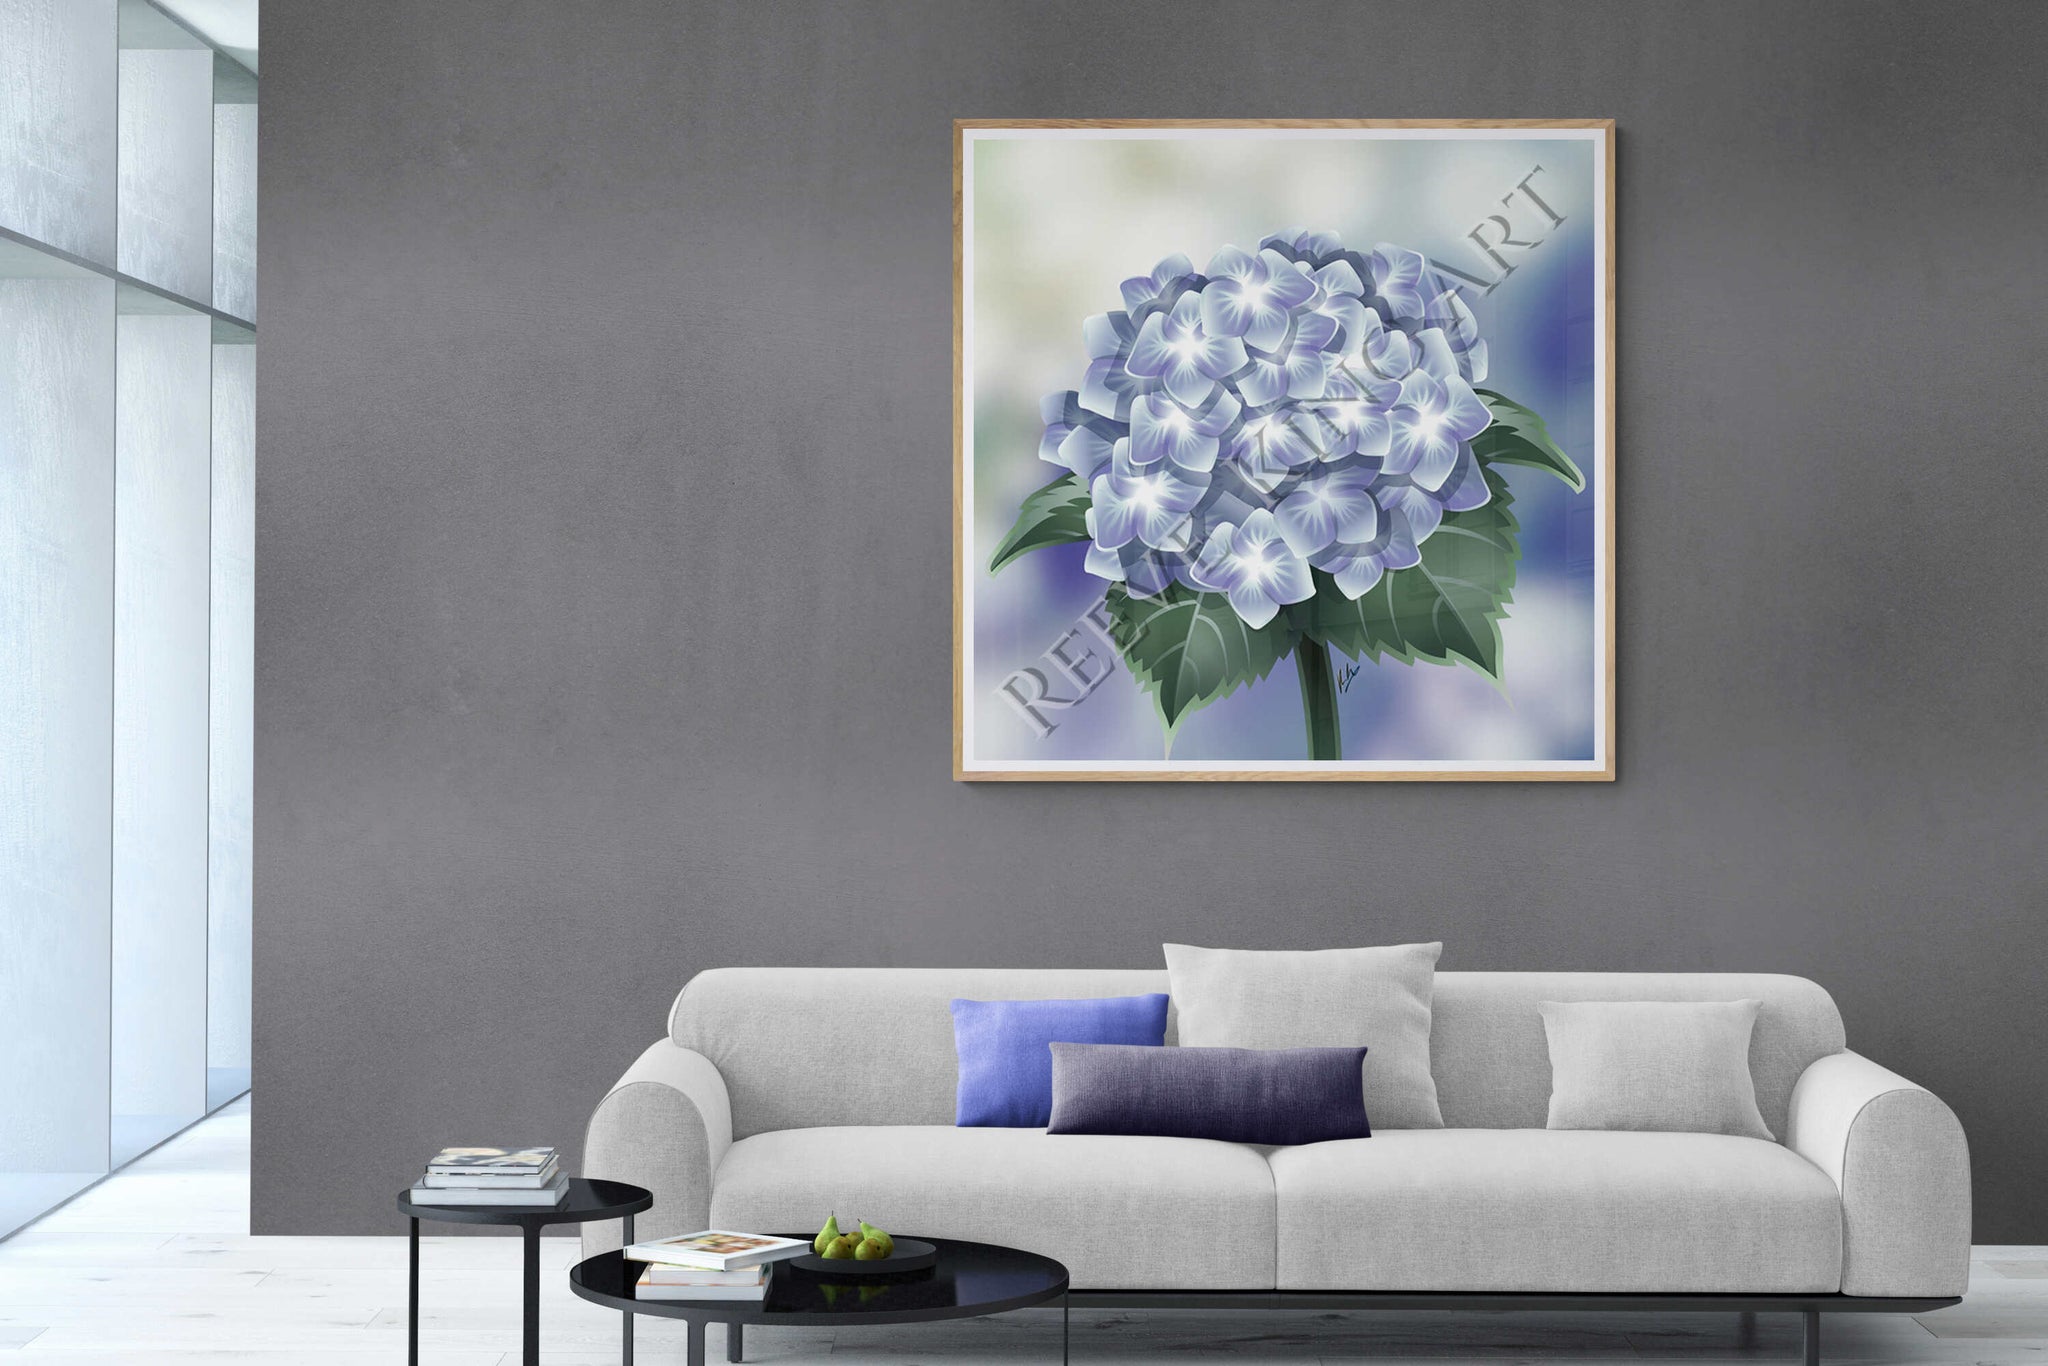 Hydrangea Print  - French Country Hamptons Coastal by artist Reeve King